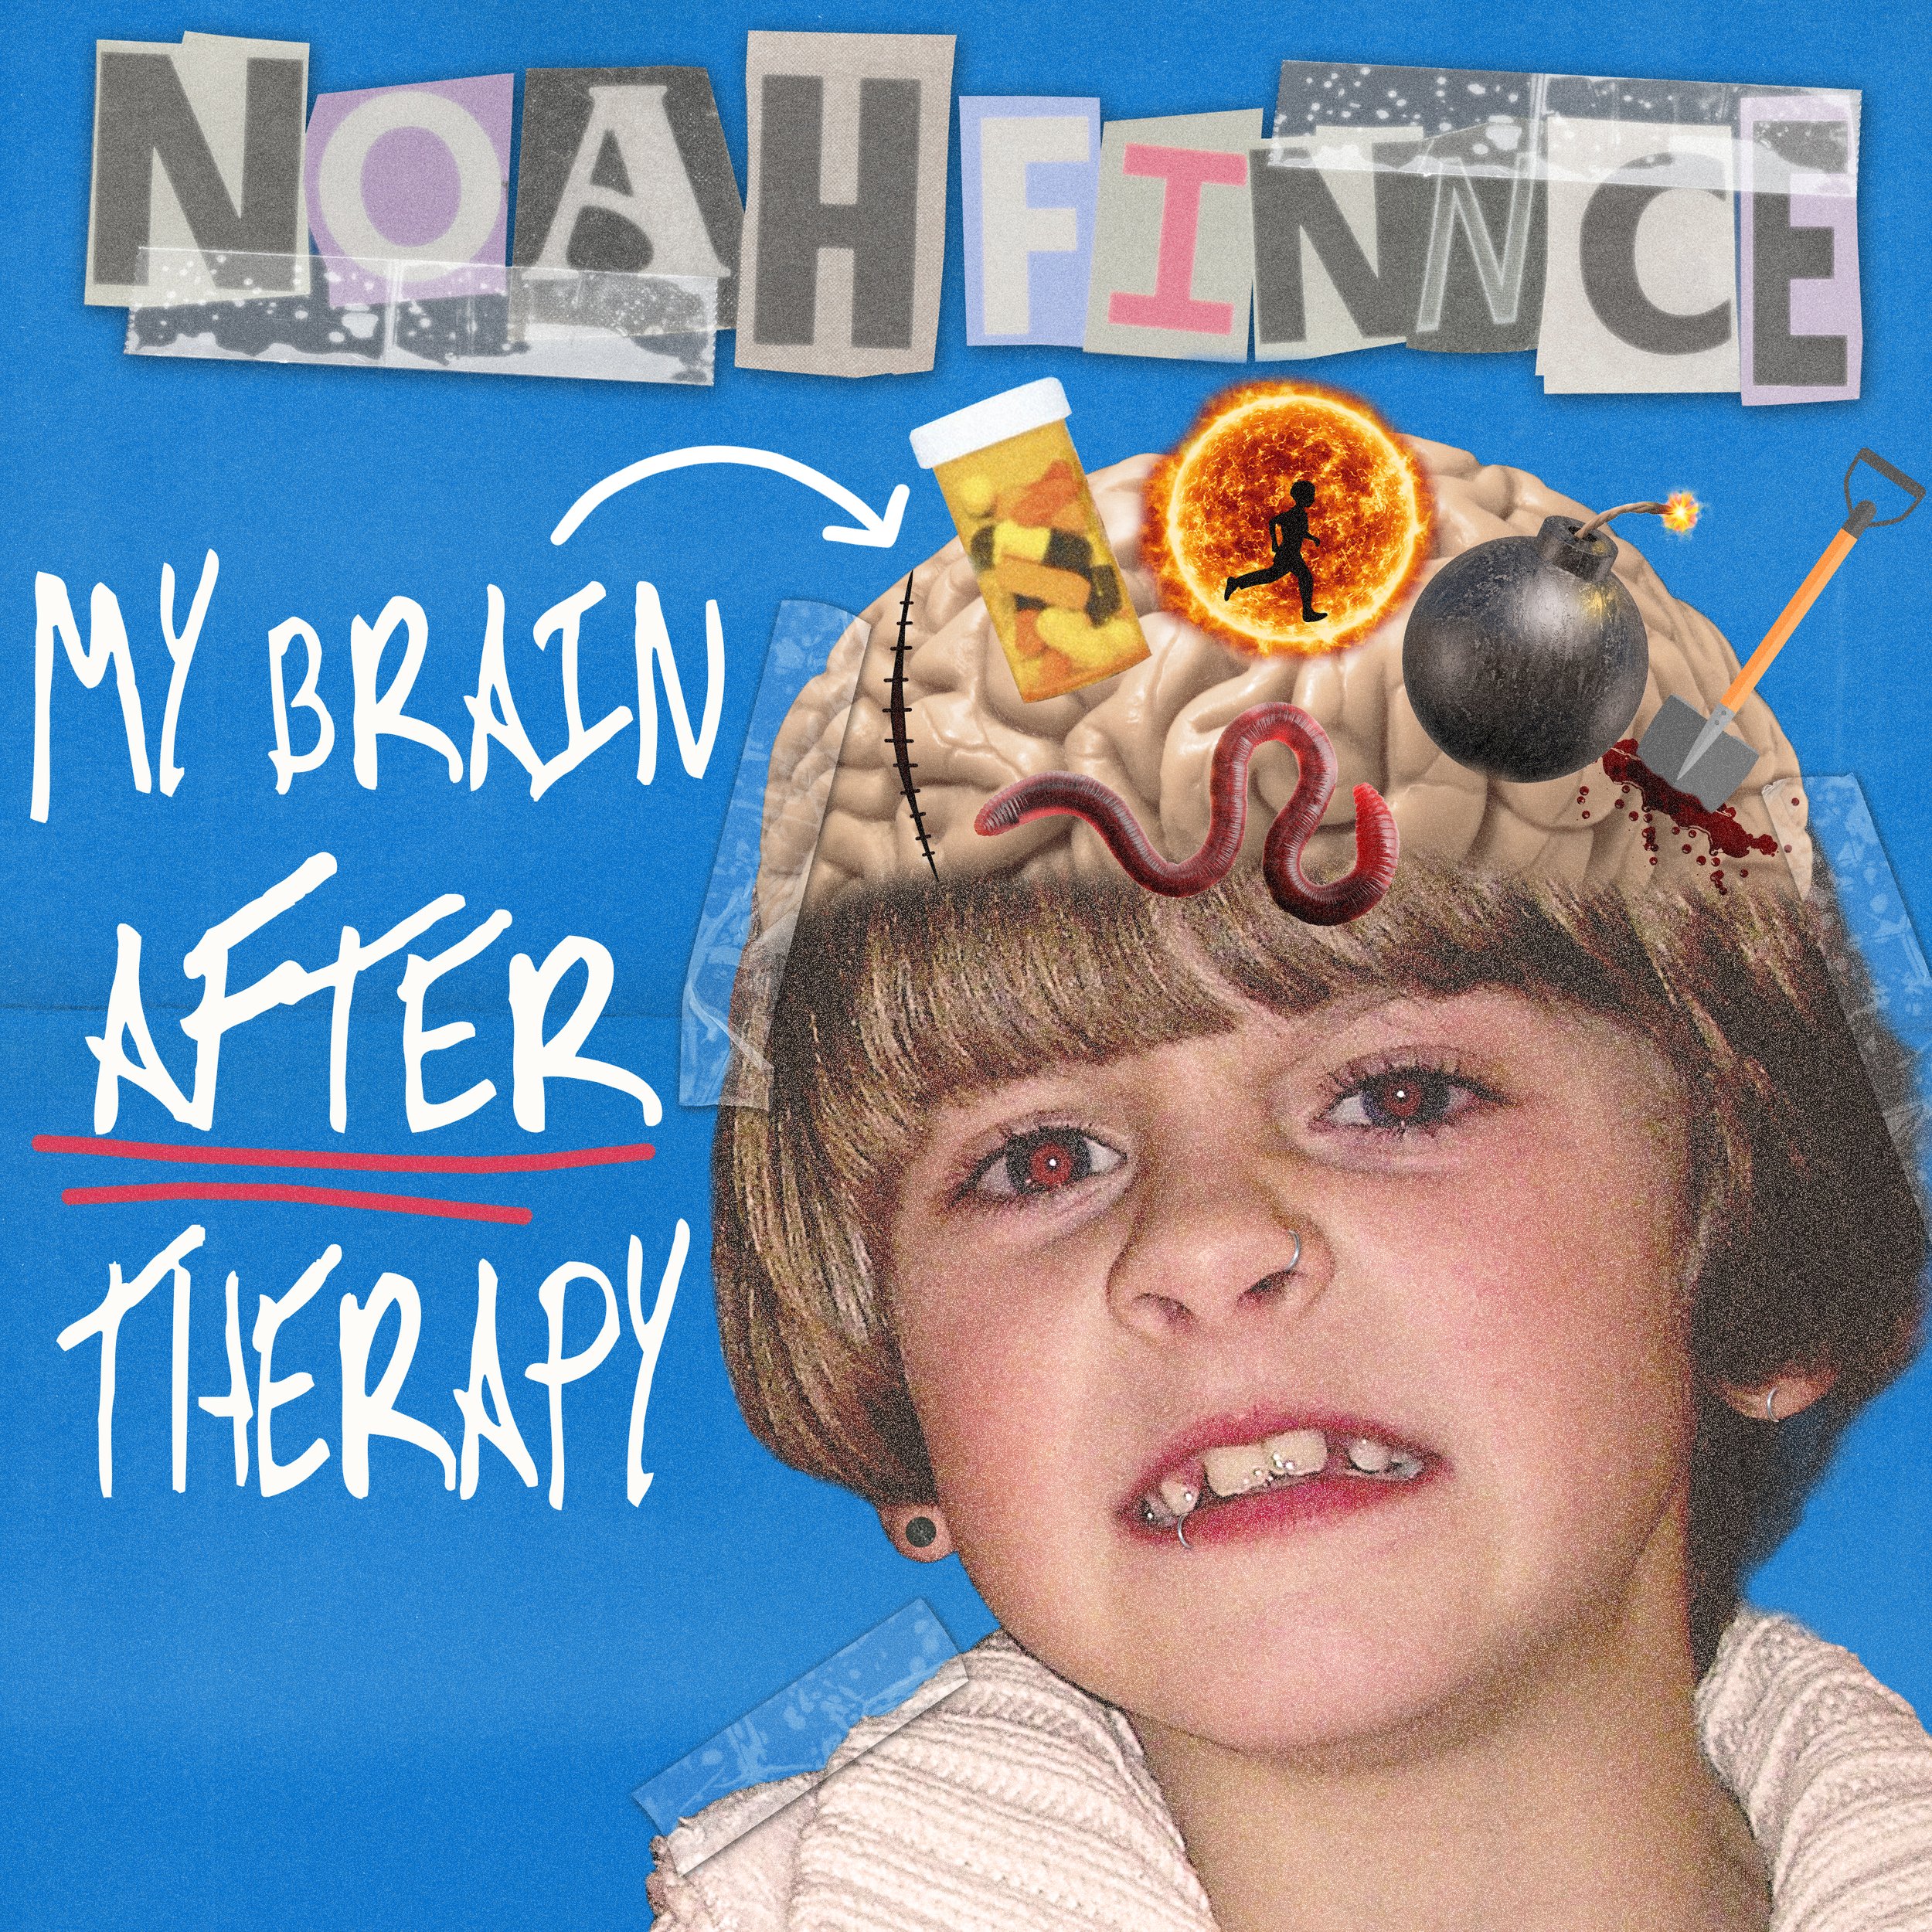 NOAHFINNCE - MY BRAIN AFTER THERAPY